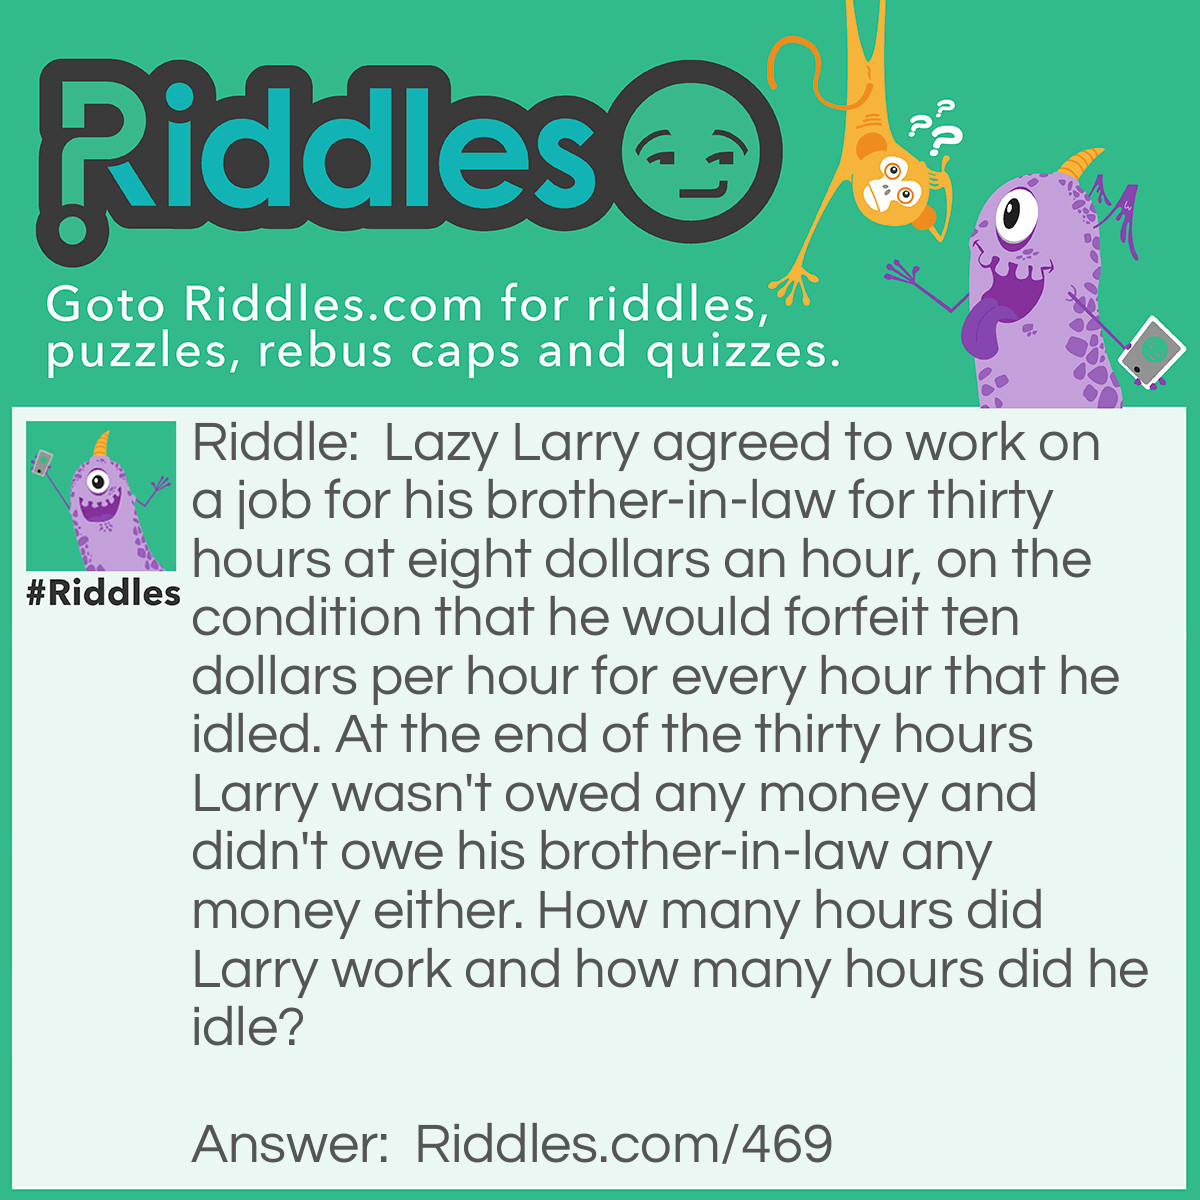 Riddle: Lazy Larry agreed to work on a job for his brother-in-law for thirty hours at eight dollars an hour, on the condition that he would forfeit ten dollars per hour for every hour that he idled. At the end of the thirty hours Larry wasn't owed any money and didn't owe his brother-in-law any money either. How many hours did Larry work and how many hours did he idle? Answer: Lazy Larry worked 16-2/3 hours and idled 13-1/3 hours. 16-2/3 hours, at $8.00 an hour amounts to the same amount as 13-1/3 hours at $10.00 per hour.